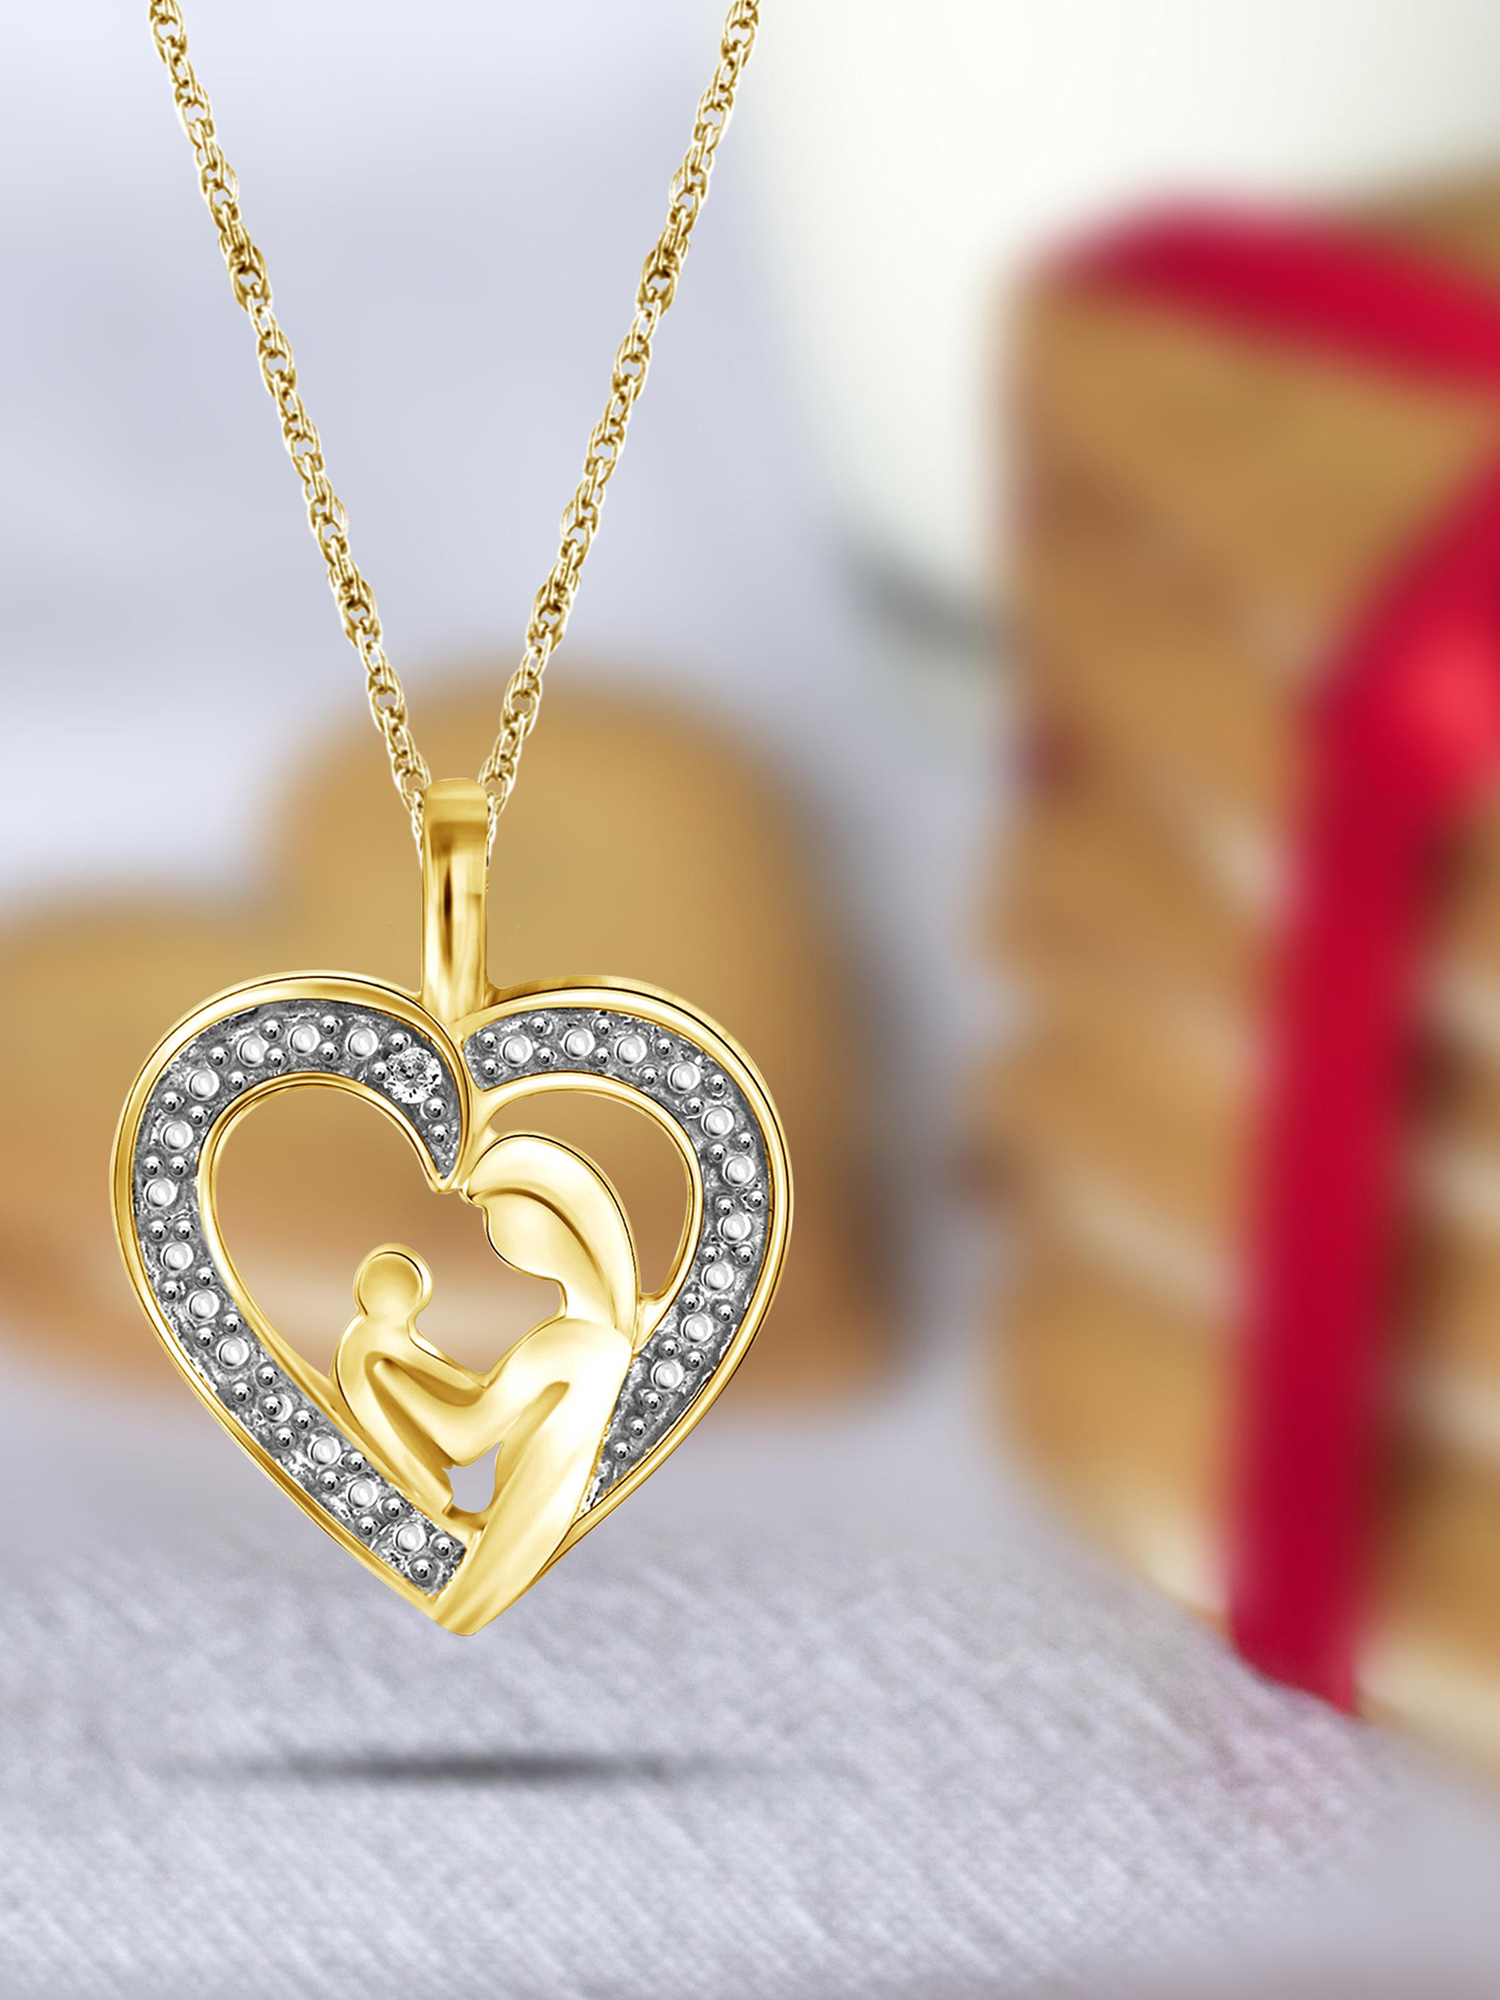 JewelersClub Heart Necklace with White Diamond Accent | 14K gold-plated Silver | Jewelry Pendant Necklaces for Women & 18 inch Rope Chain with Spring Clasp - image 4 of 5